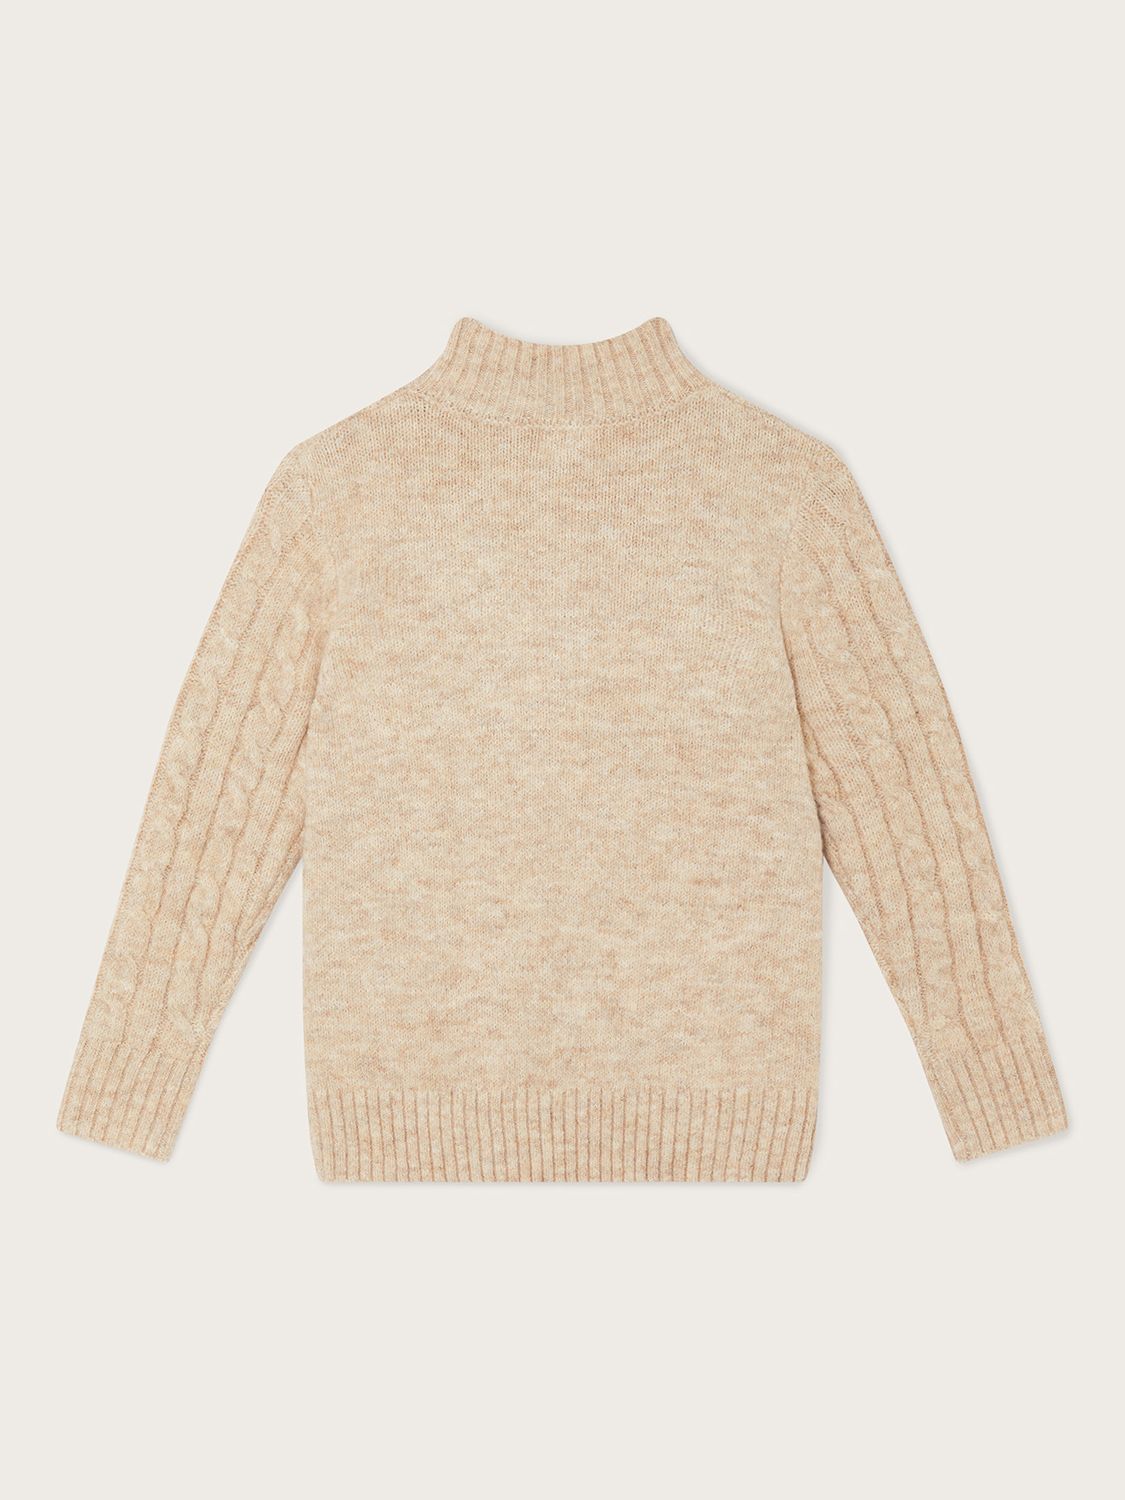 Buy Monsoon Kids' Cable Half Zip Knitted Jumper, Stone Online at johnlewis.com